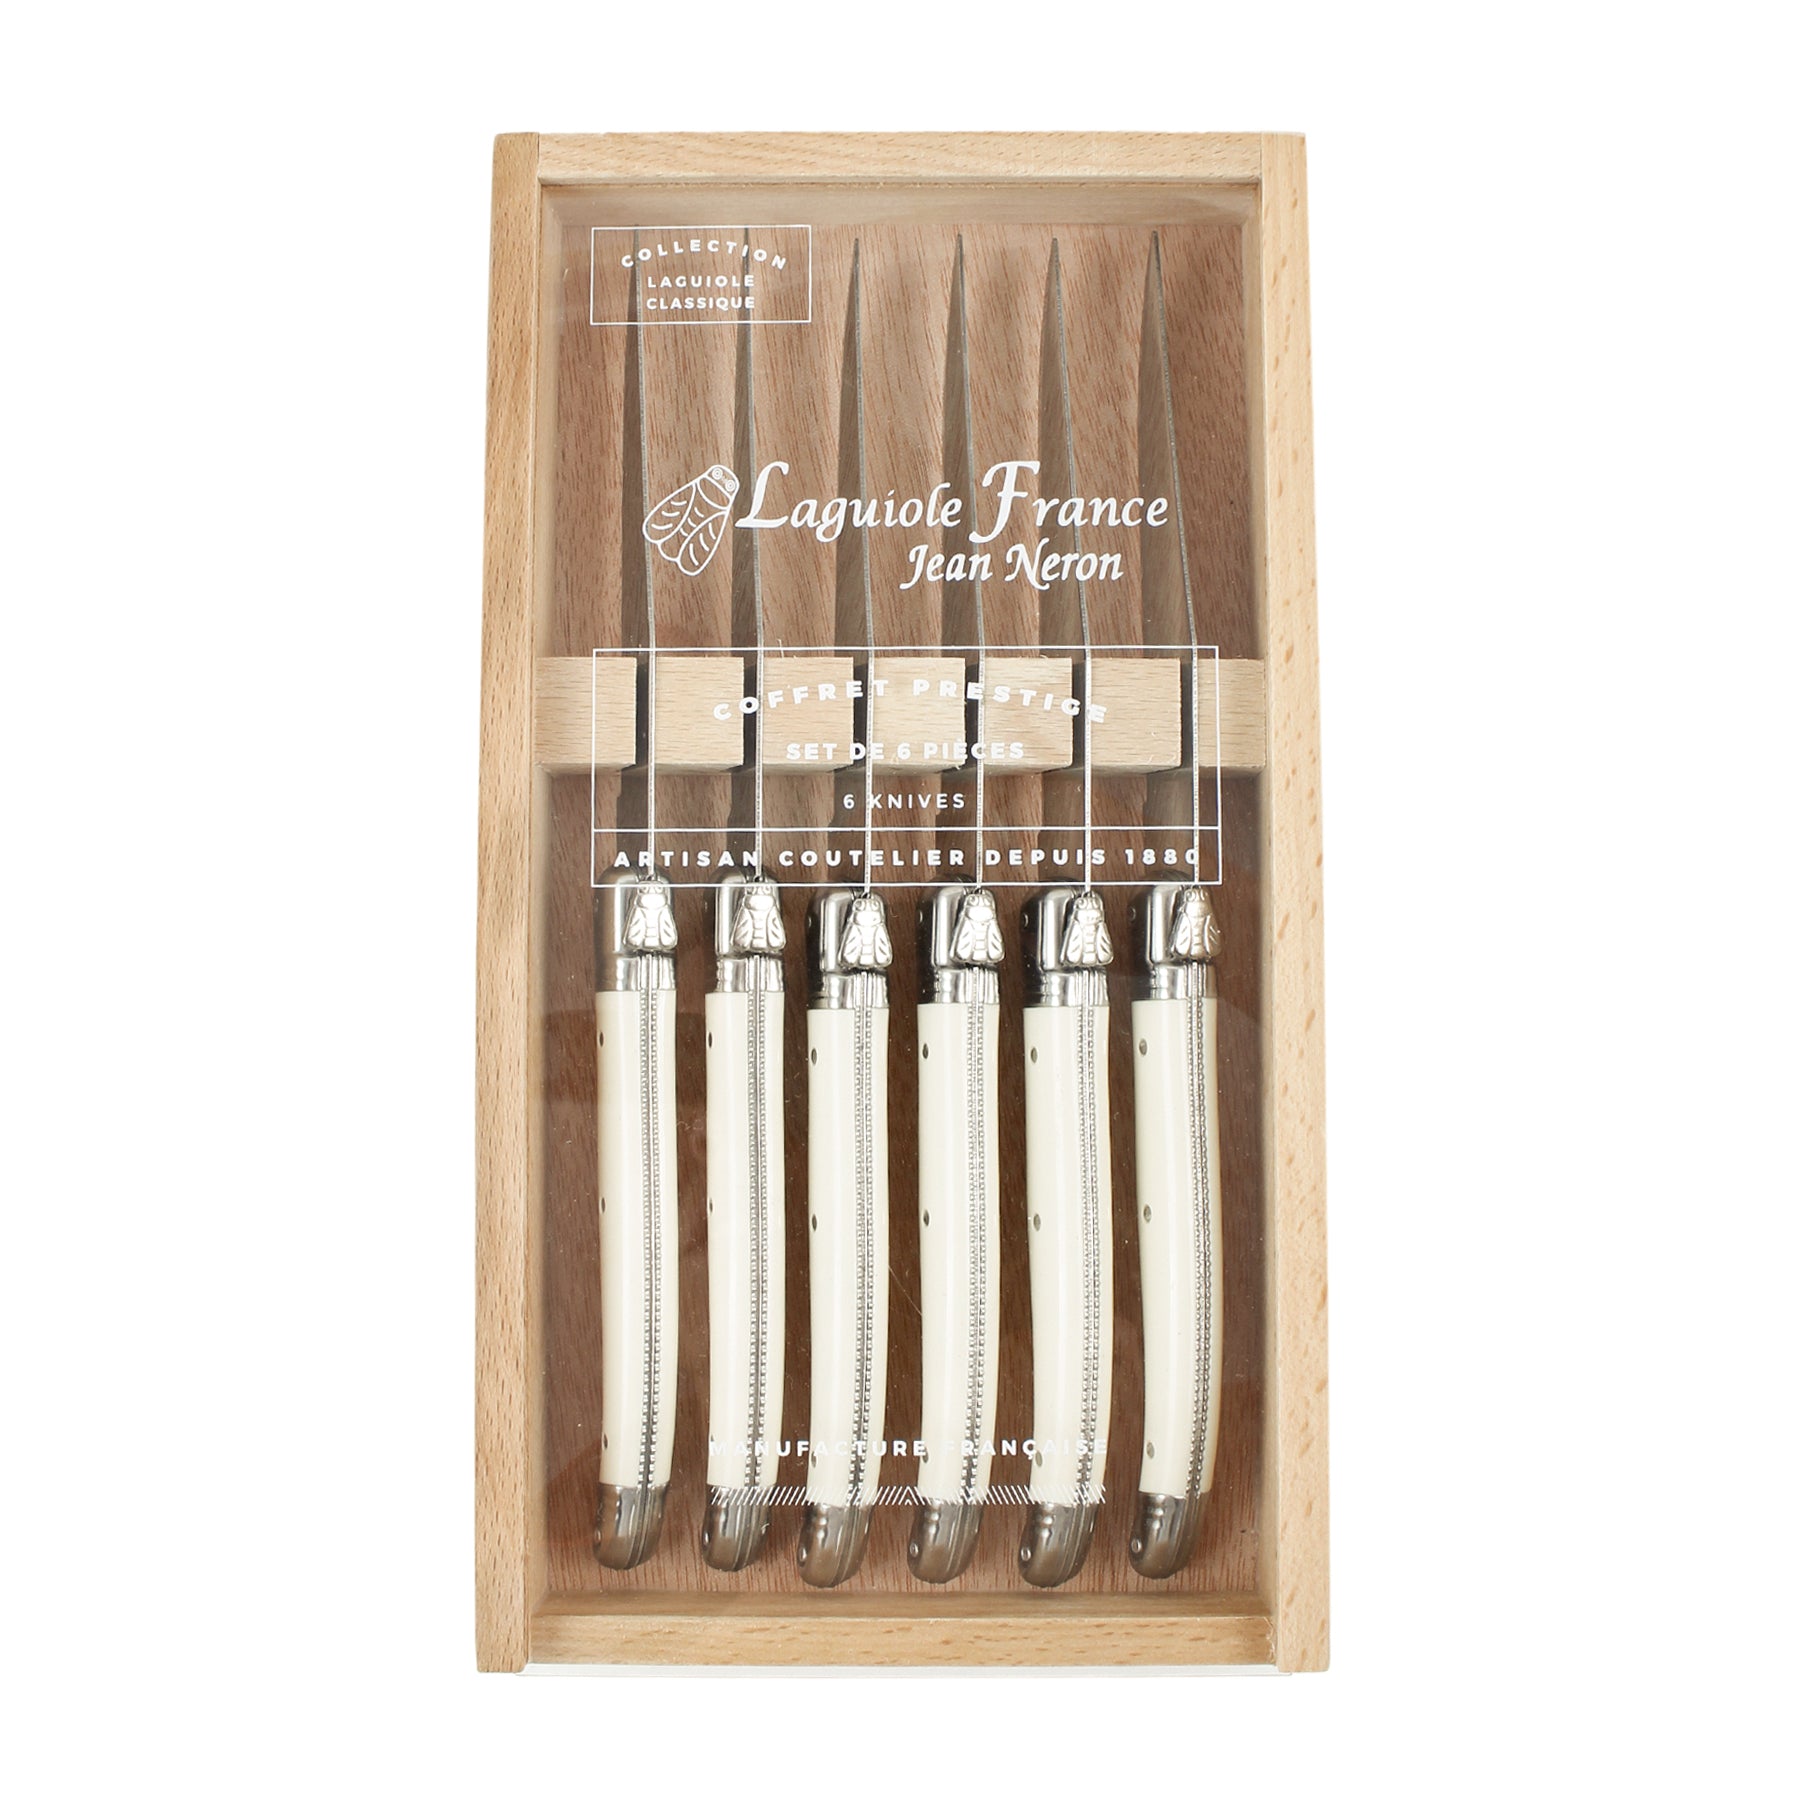 Laguiole Ivory Platine Knives in Wooden Box with Acrylic Lid (Set of 6) Cutlery Laguiole Brand_Laguiole Flatware Sets Kitchen_Dinnerware Kitchen_Kitchenware Laguiole 7900-60540M_I_AL-Laguiole-Ivory-Knives-Set-of-6-with-Acrylic-Lid_Web-_2_945359e1-2edc-43b5-b1d6-7d8acfdd8bb3